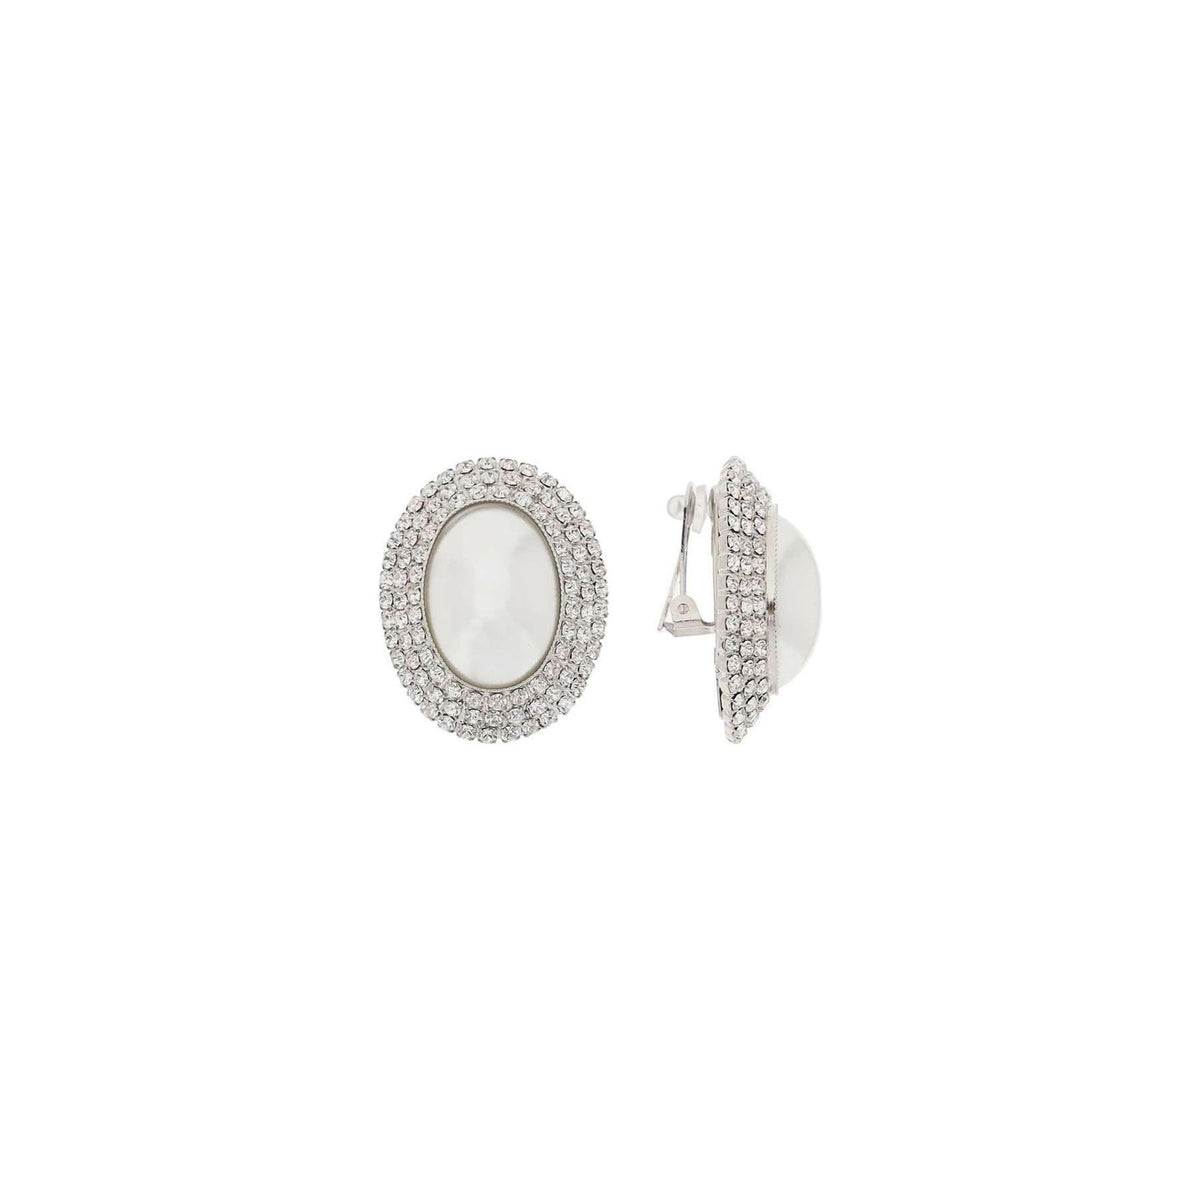 Oval Earrings With Pearl And Crystals ALESSANDRA RICH JOHN JULIA.